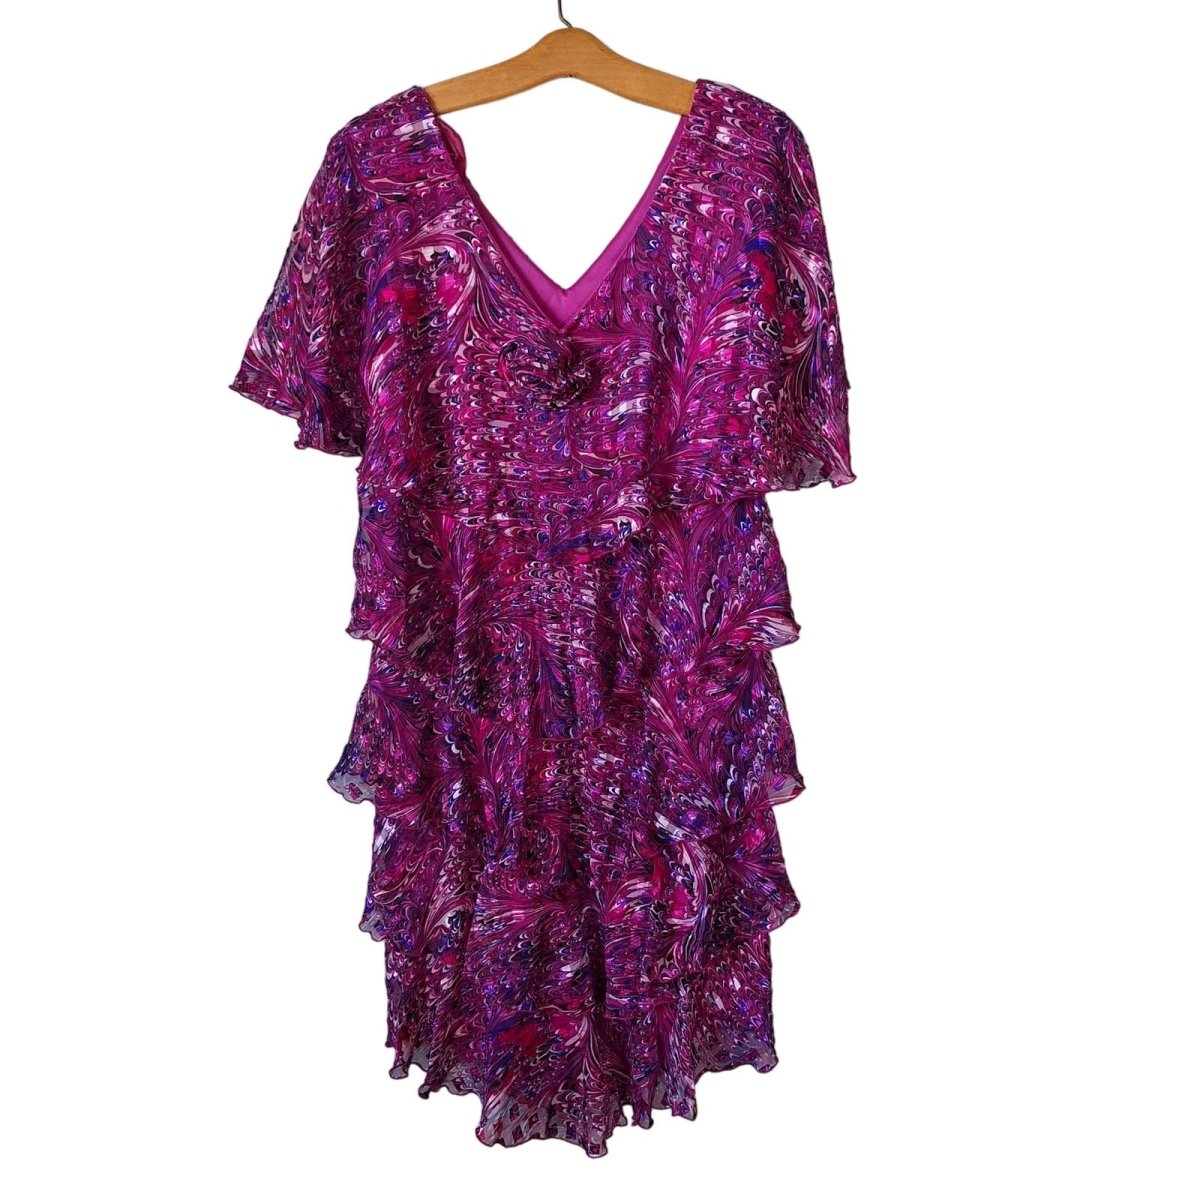 Vintage 70s/80s Hot Pink/Purple Swirl Ruffled Flutter Sleeve Dress Women Size Large - themallvintage The Mall Vintage